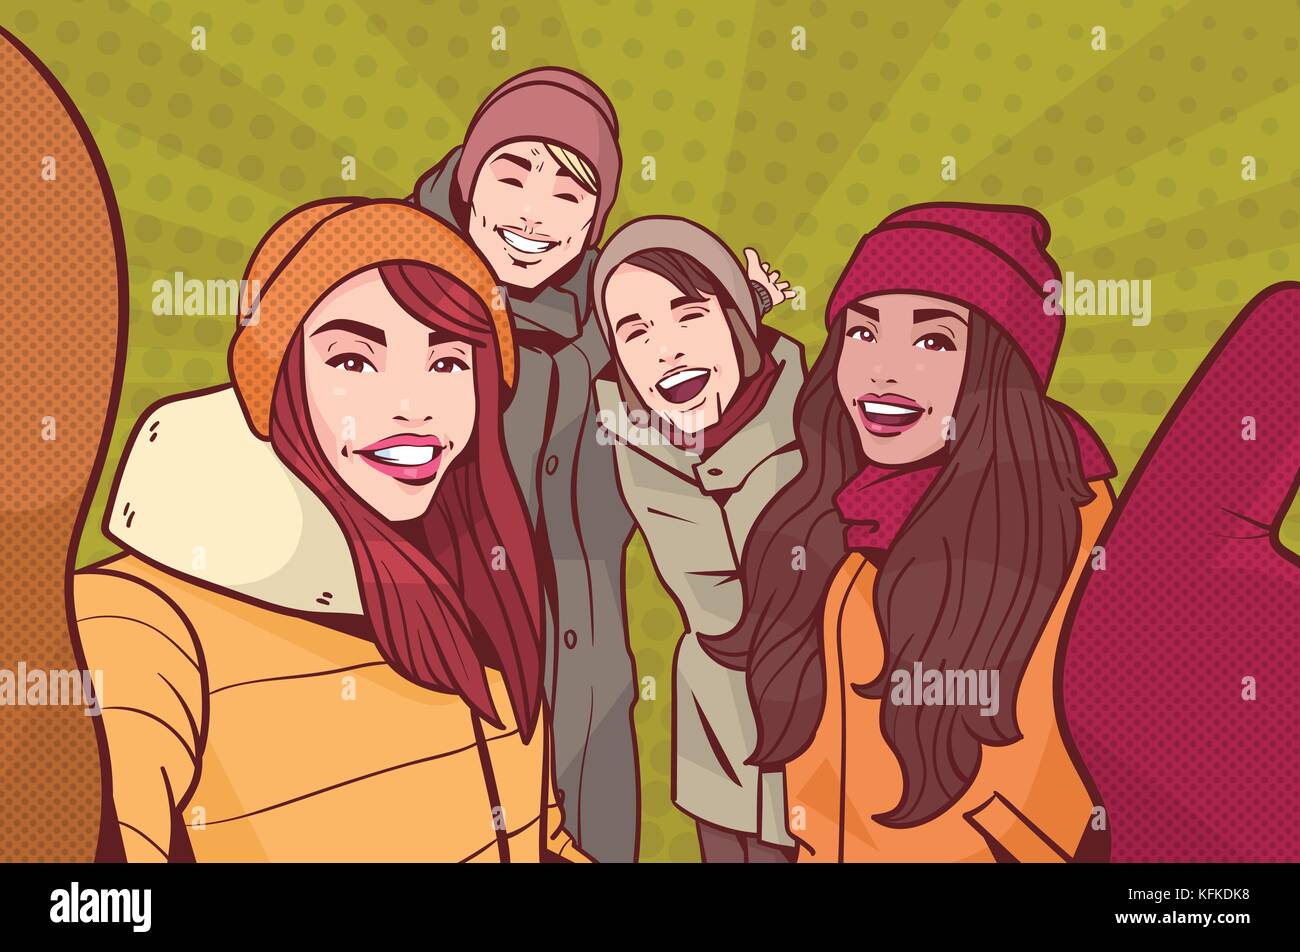 Group Of Young People Making Selfie Photo Wearing Winter Clothes Over Colorful Retro Style Background Mix Race Man And Woman Happy Smiling Take Self Portrait Stock Vector